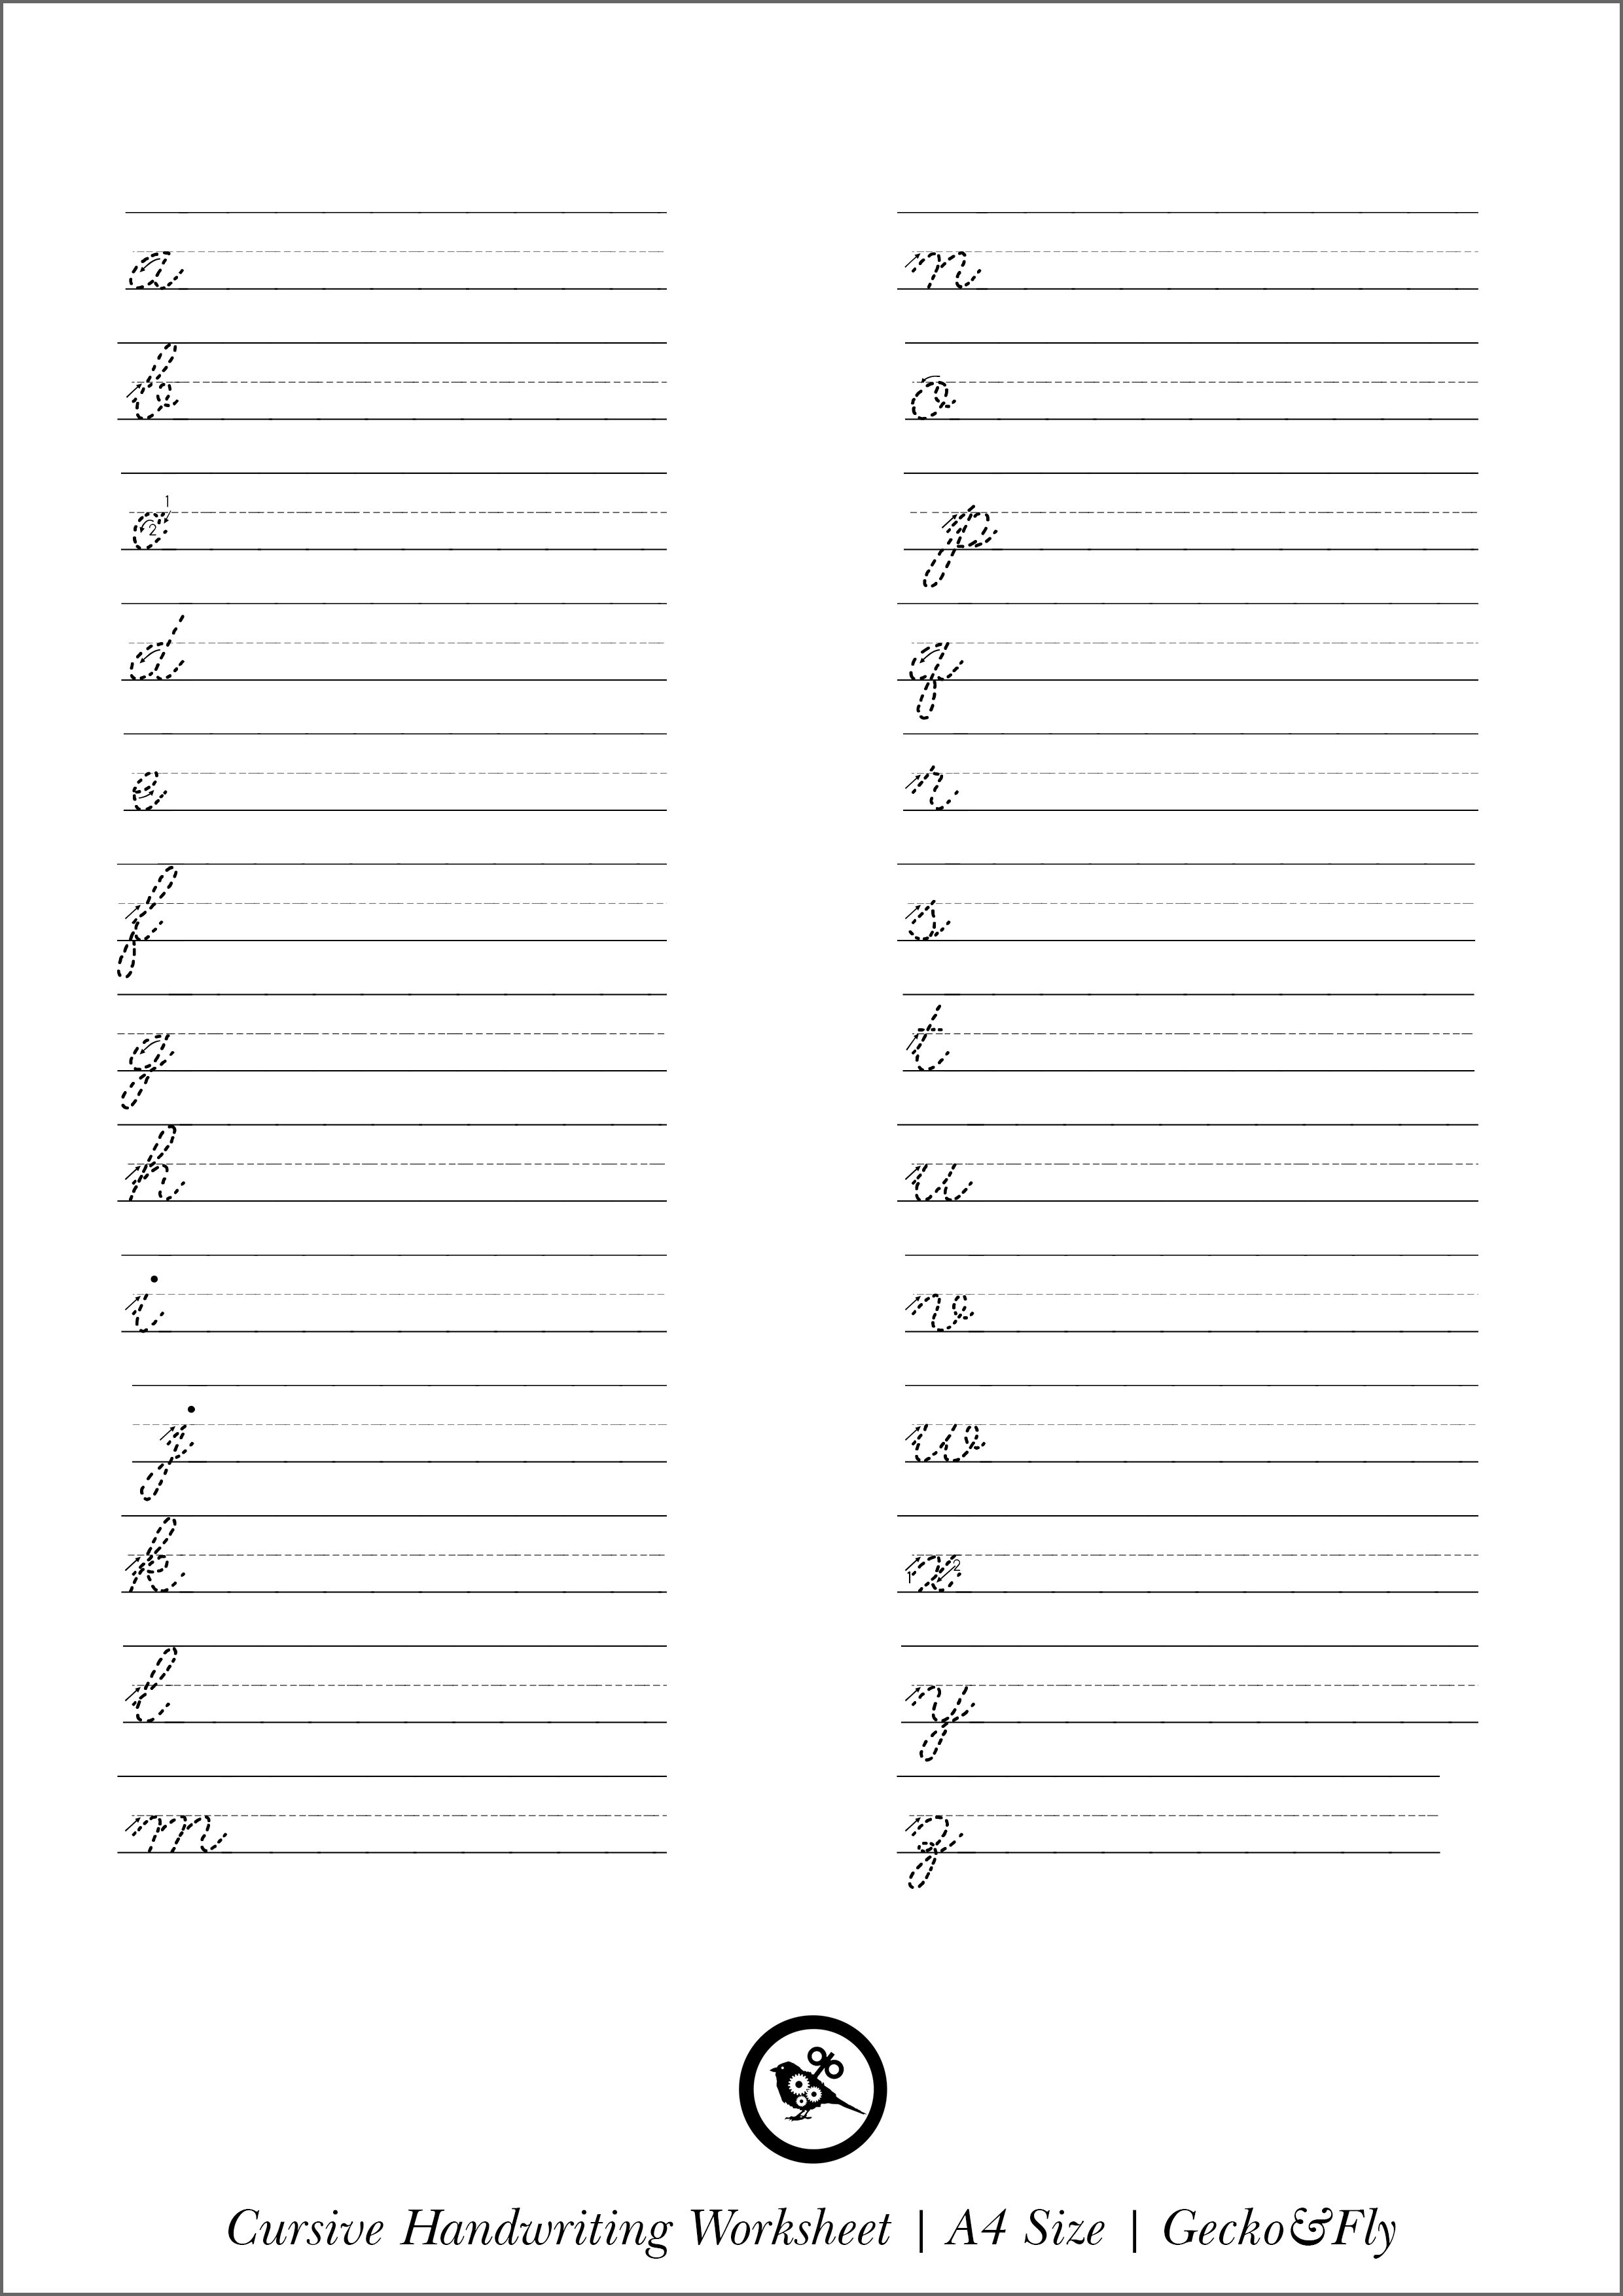 how to make your handwriting better cursive